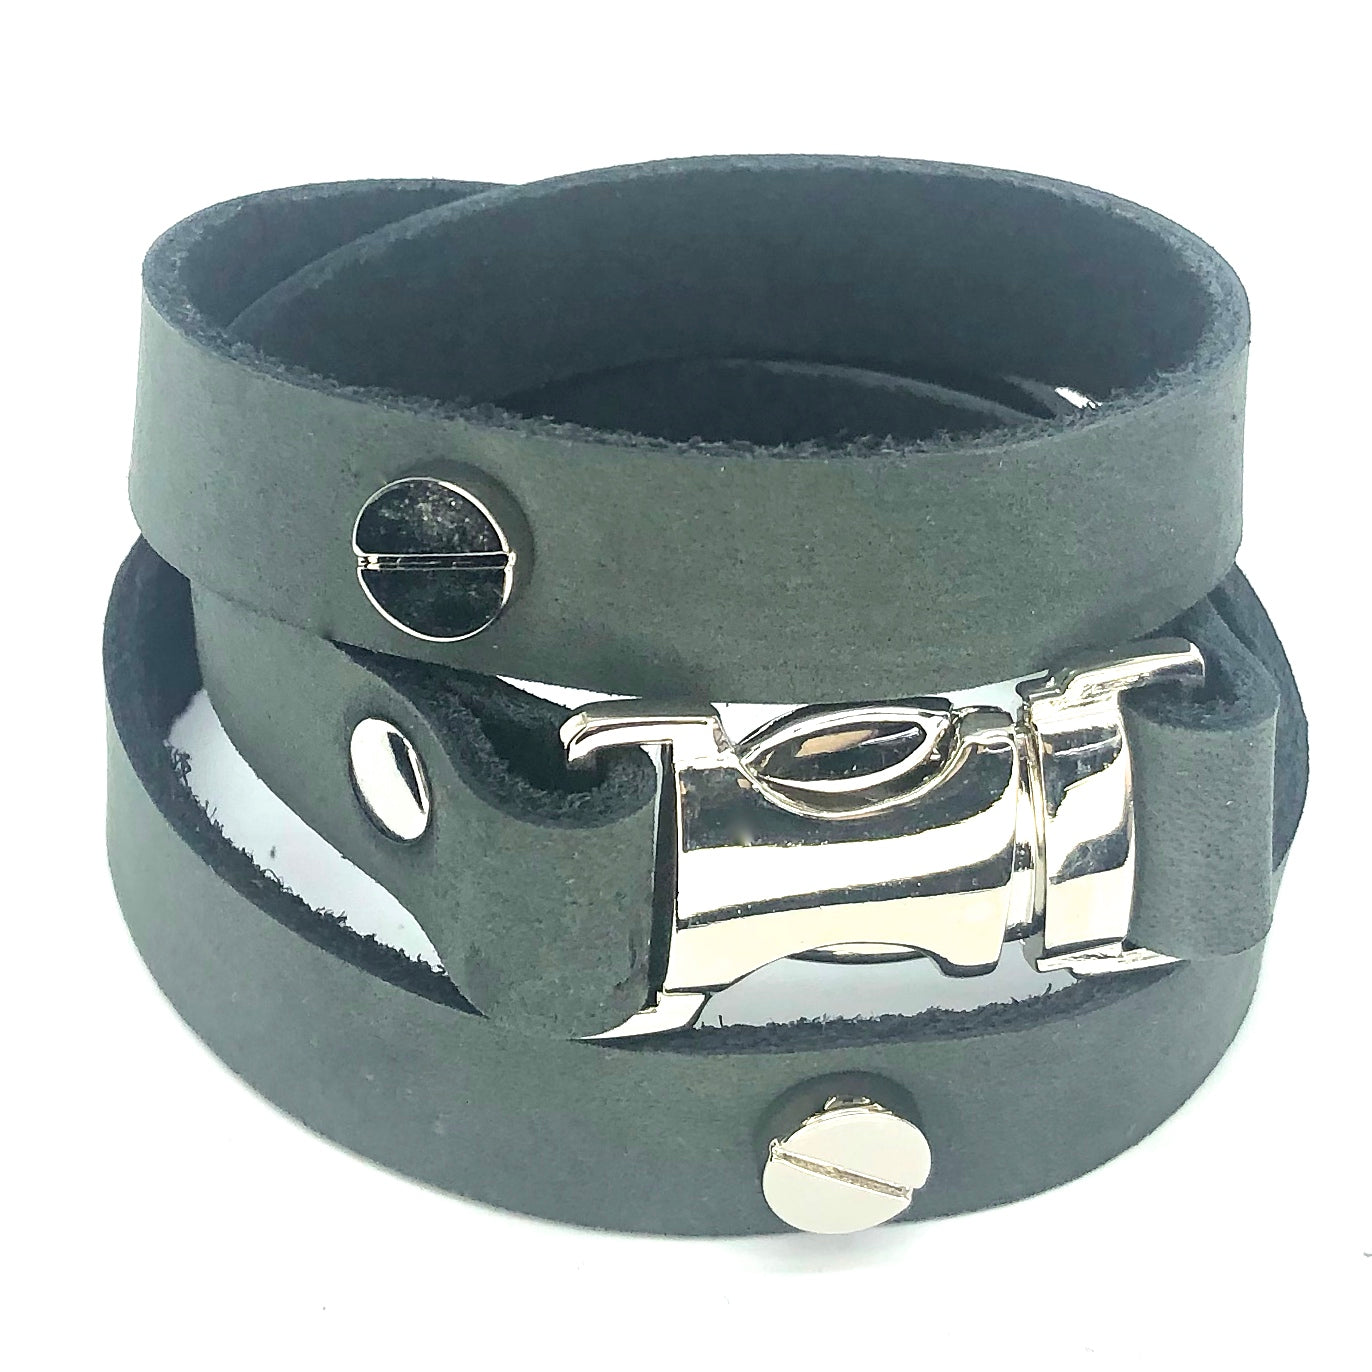 Quicksnap triple leather wraparound bracelet distressed utility leather by nyet jewelry,